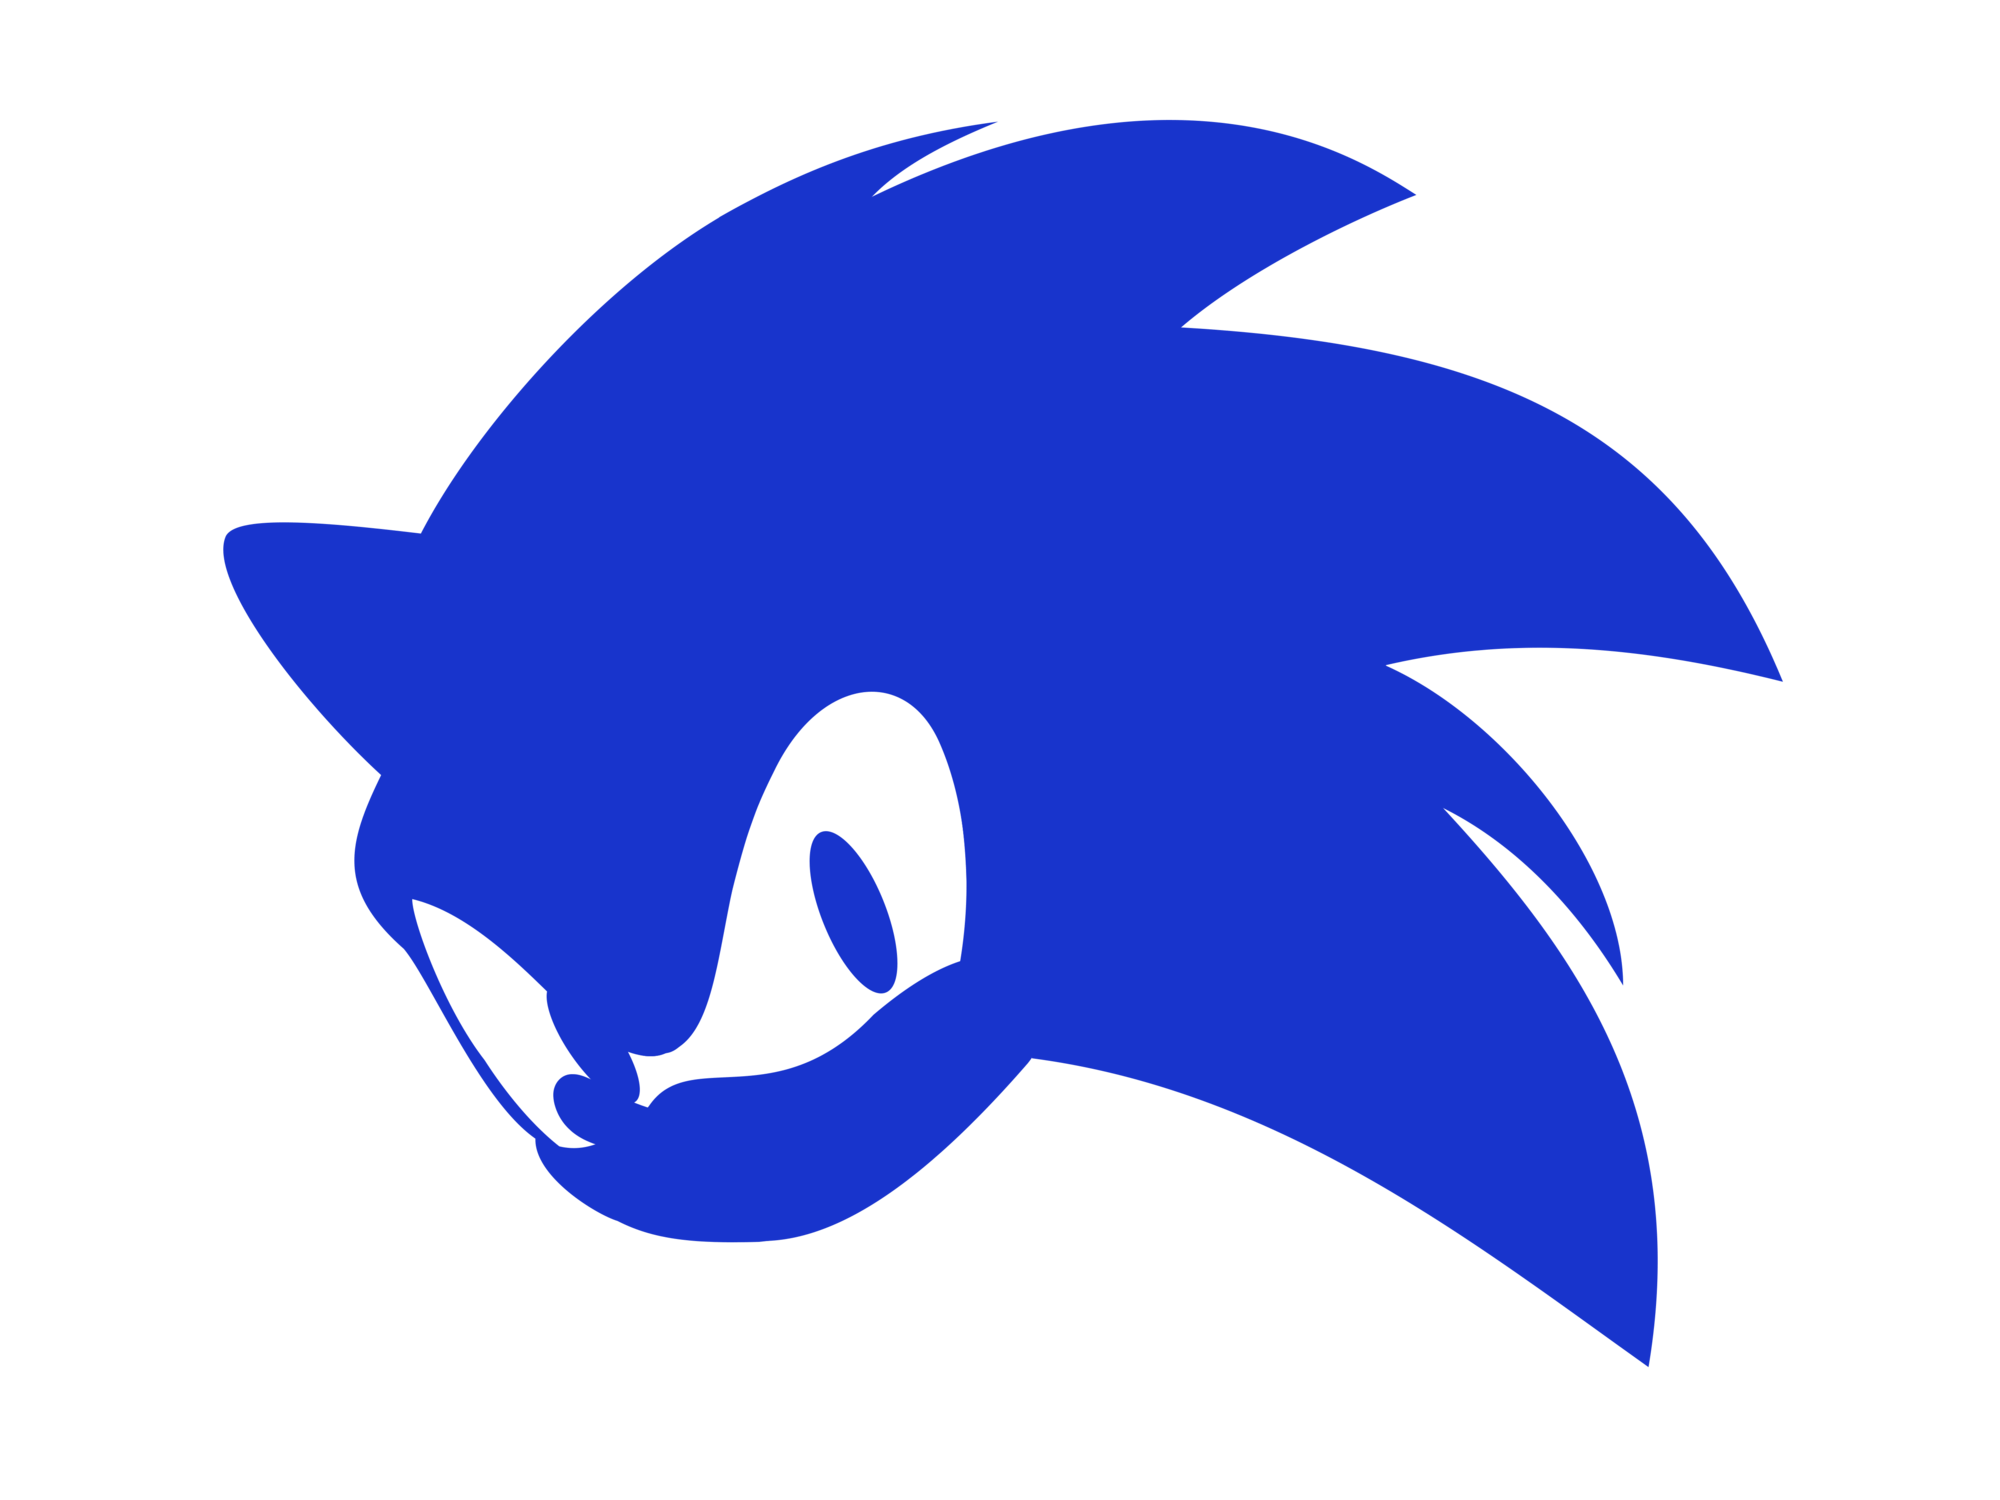 Sonic Logo - Sonic Logo, Sonic Symbol, Meaning, History and Evolution